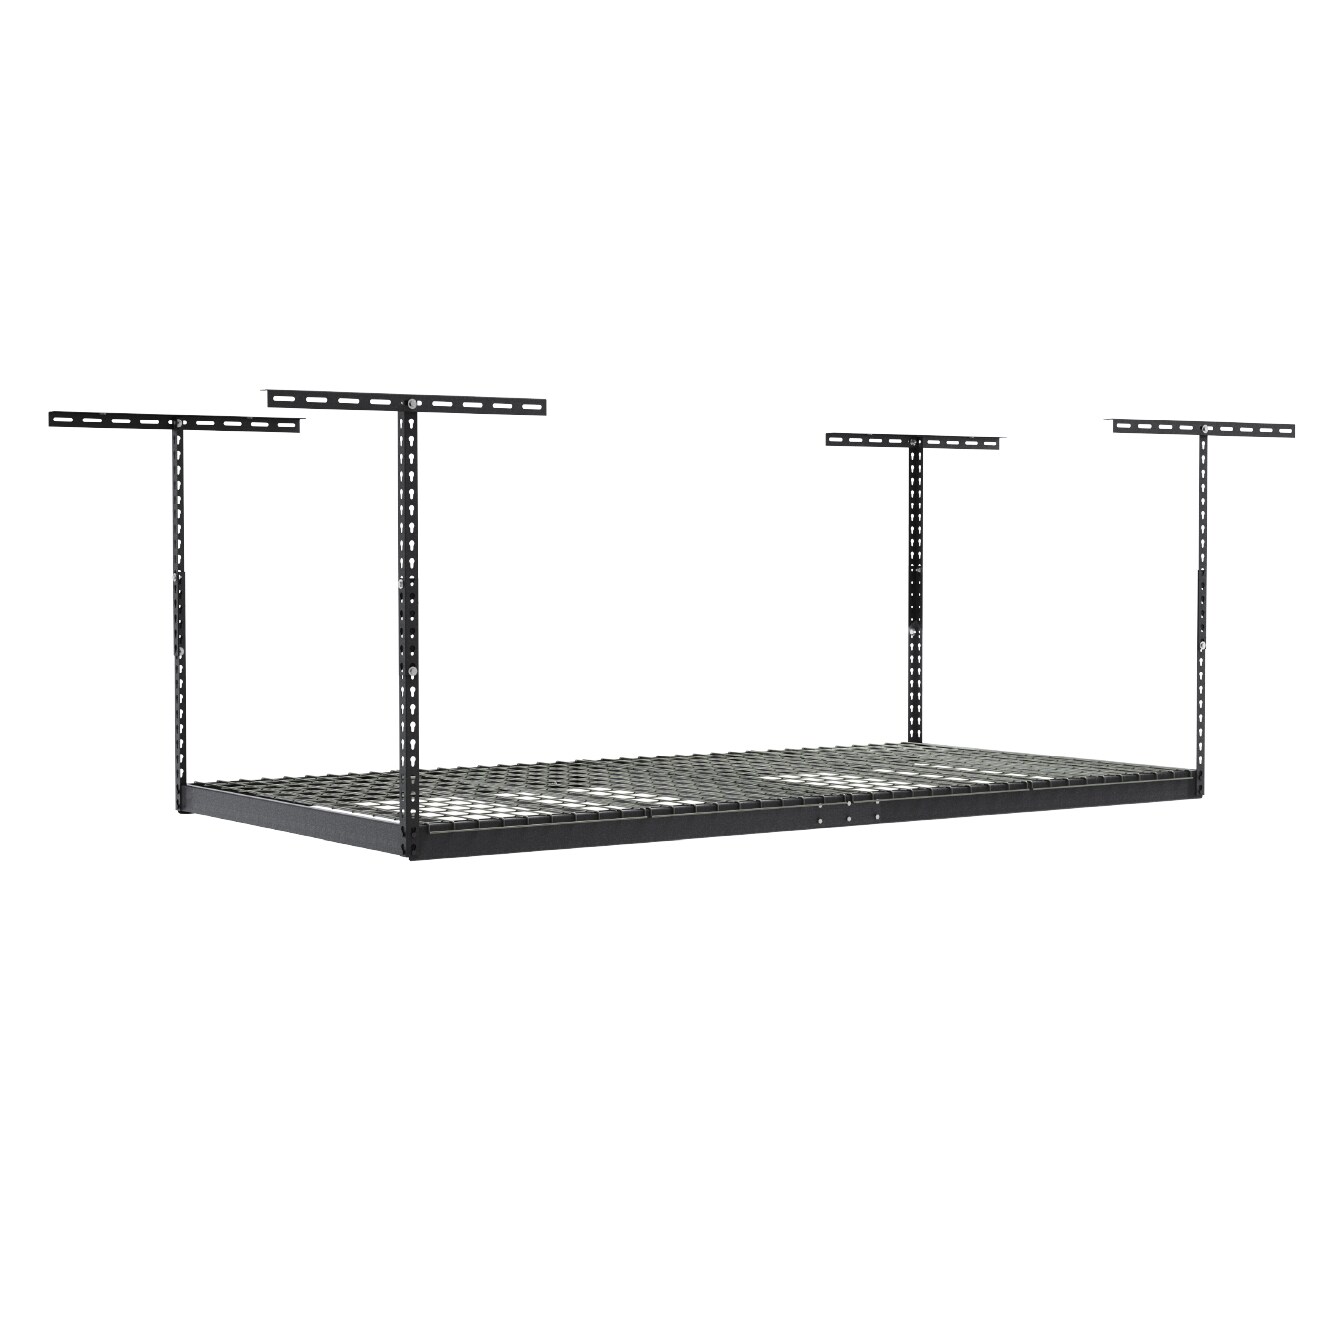 Garage ceiling storage rack at Lowes.com: Search Results